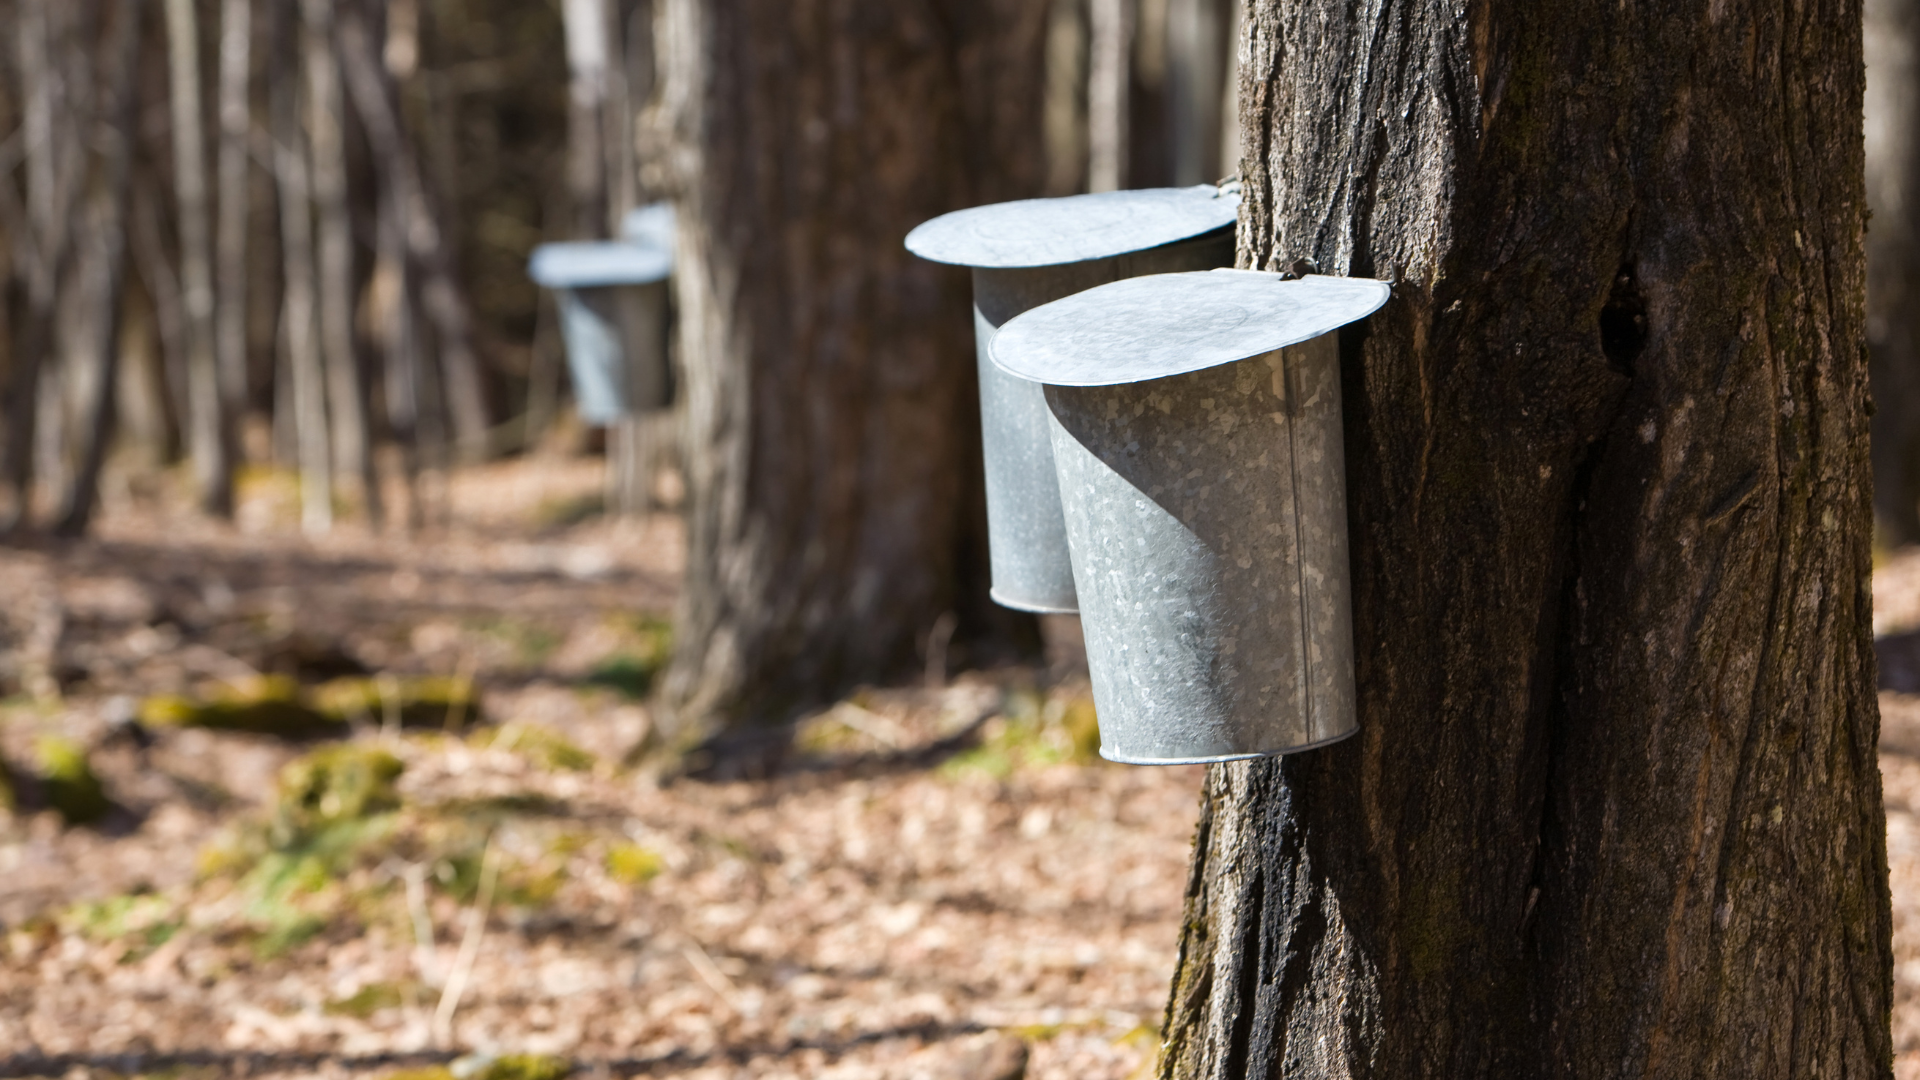 maple syrup buckets on trees, local maple syrup in utah is difficult to get...